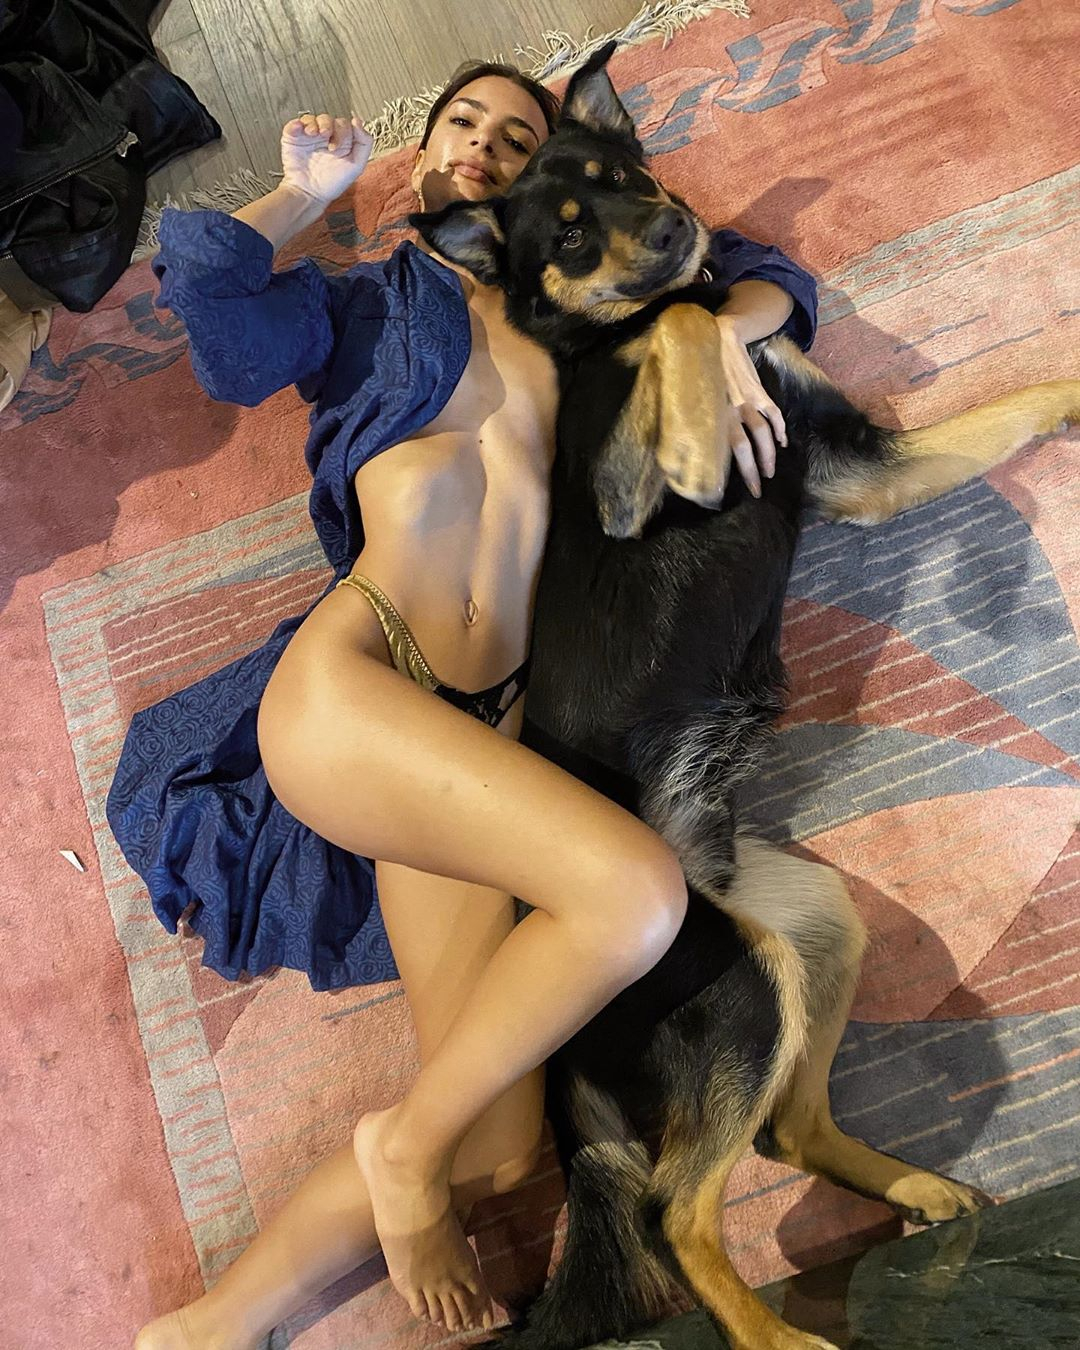 Best of Naked women and dogs